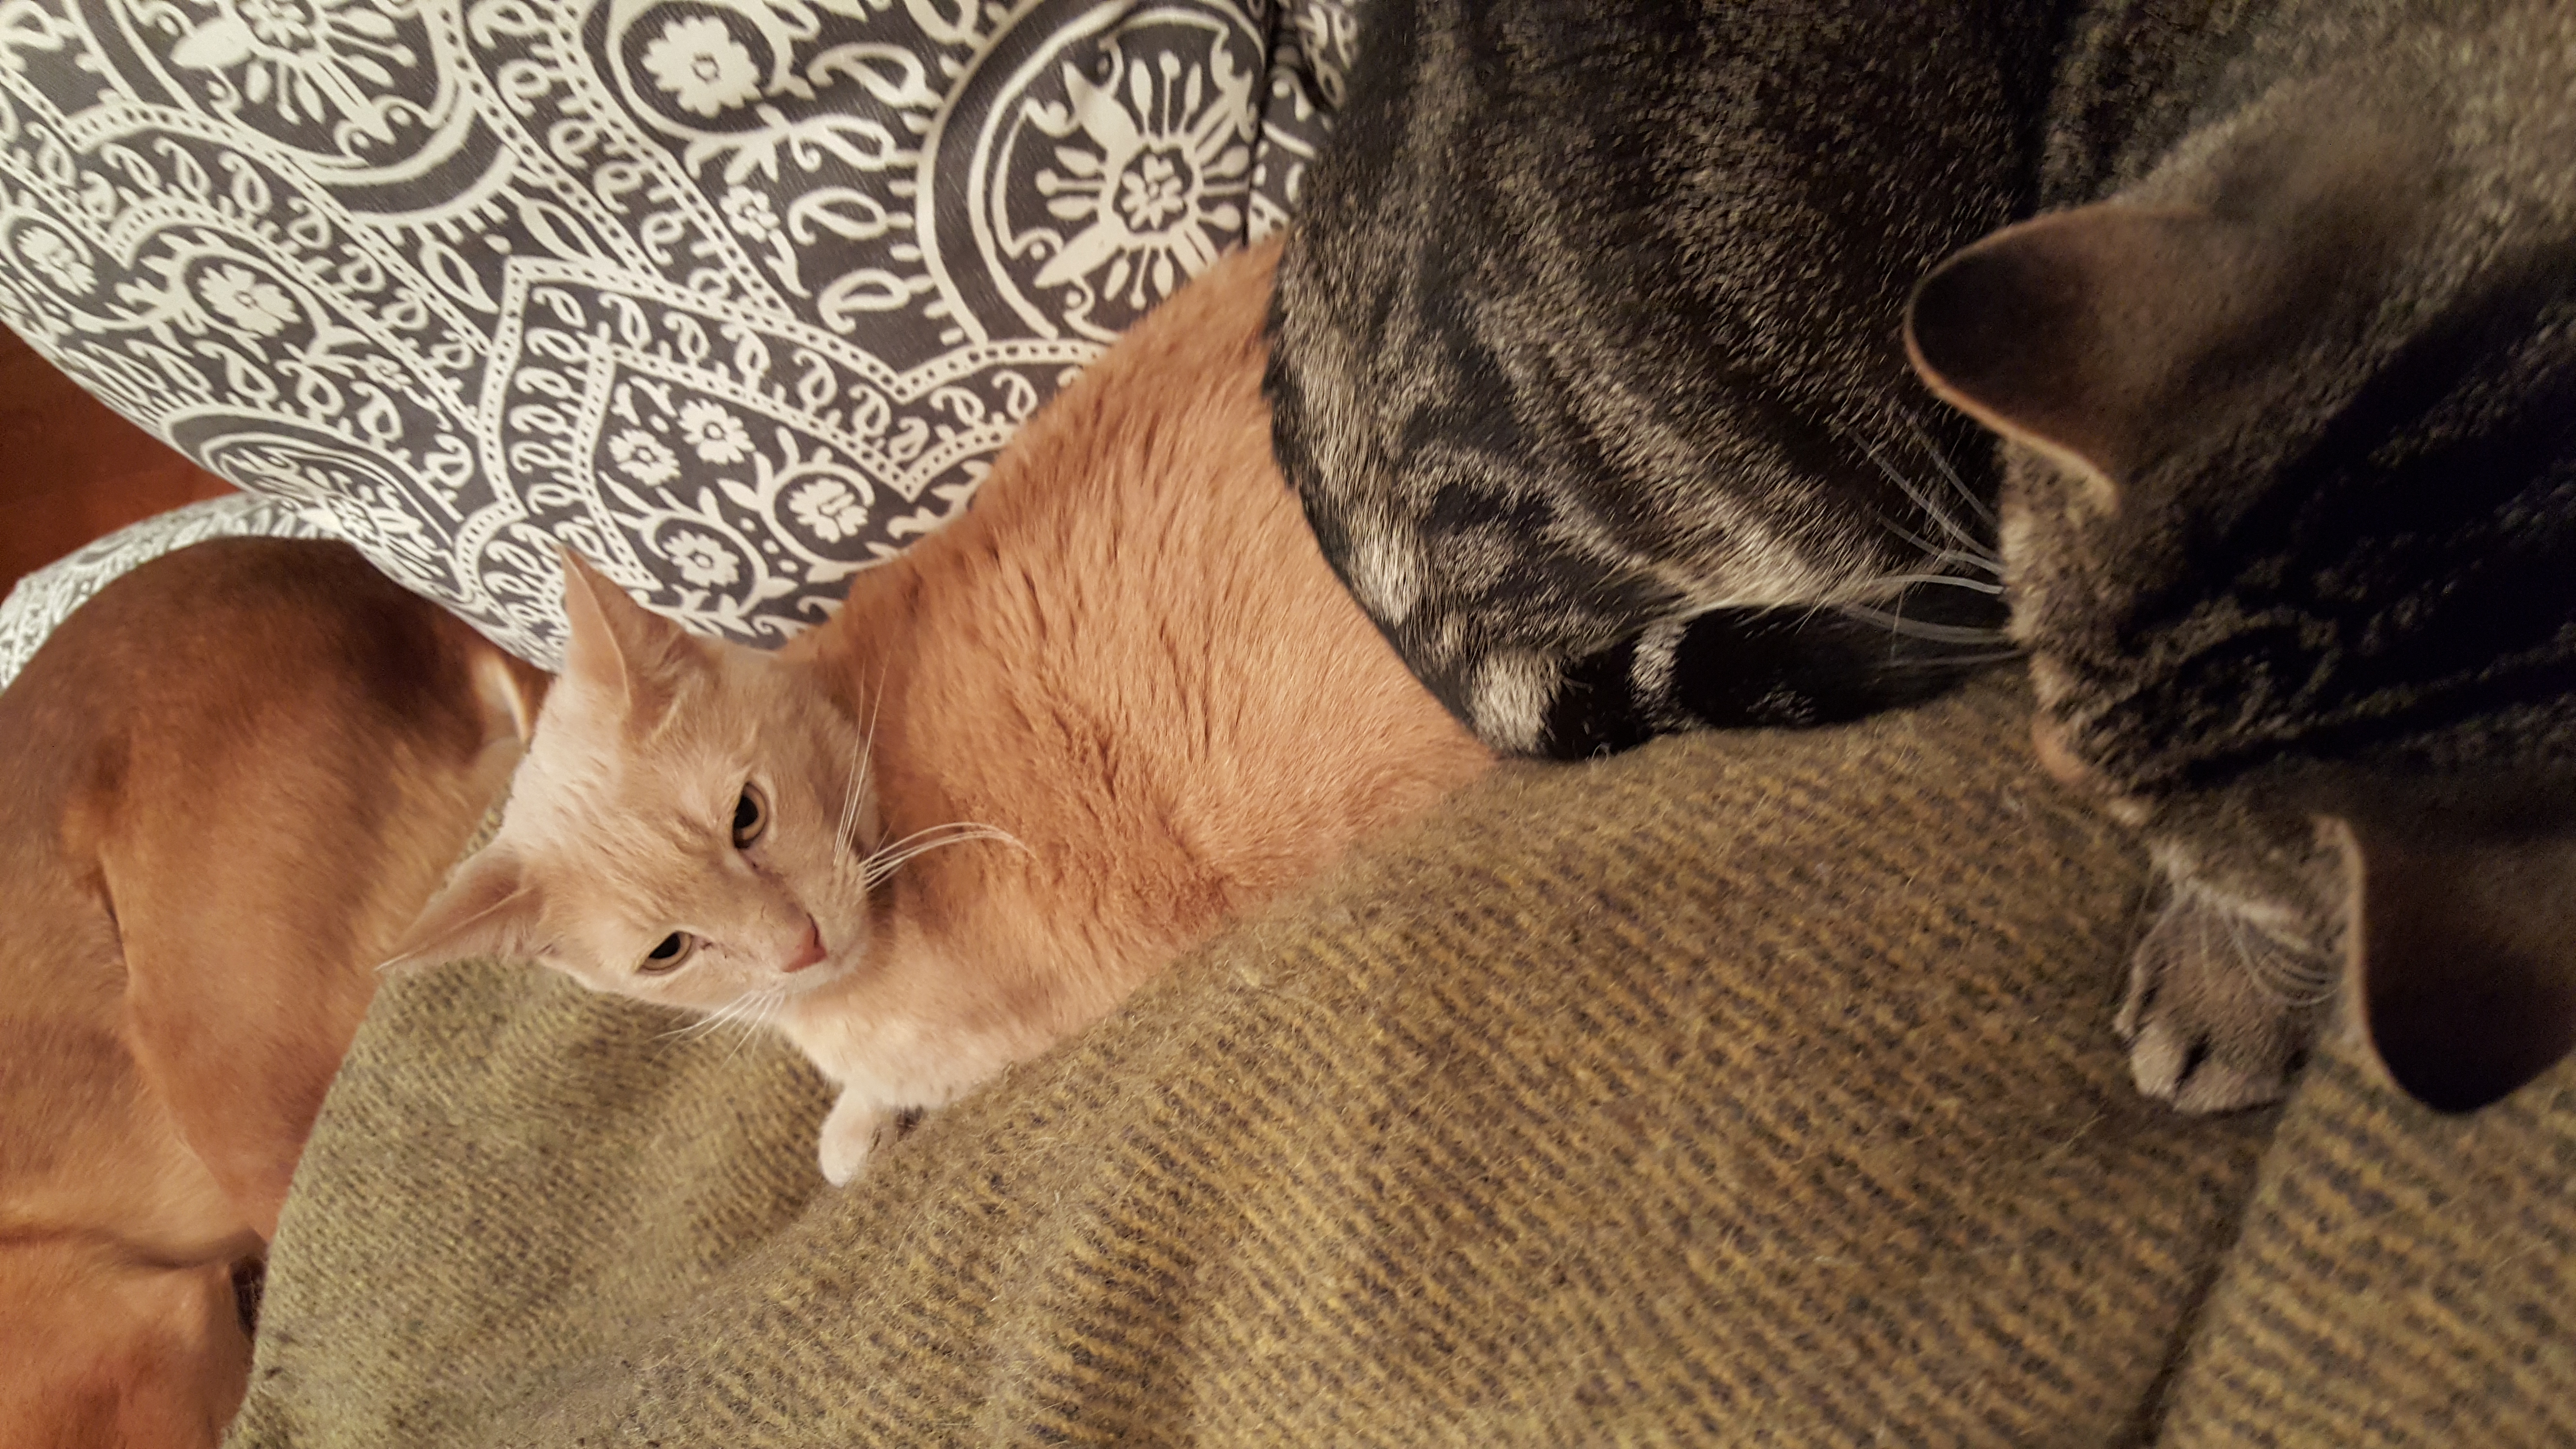 Toby and Tyrion hesitantly touching on the couch.